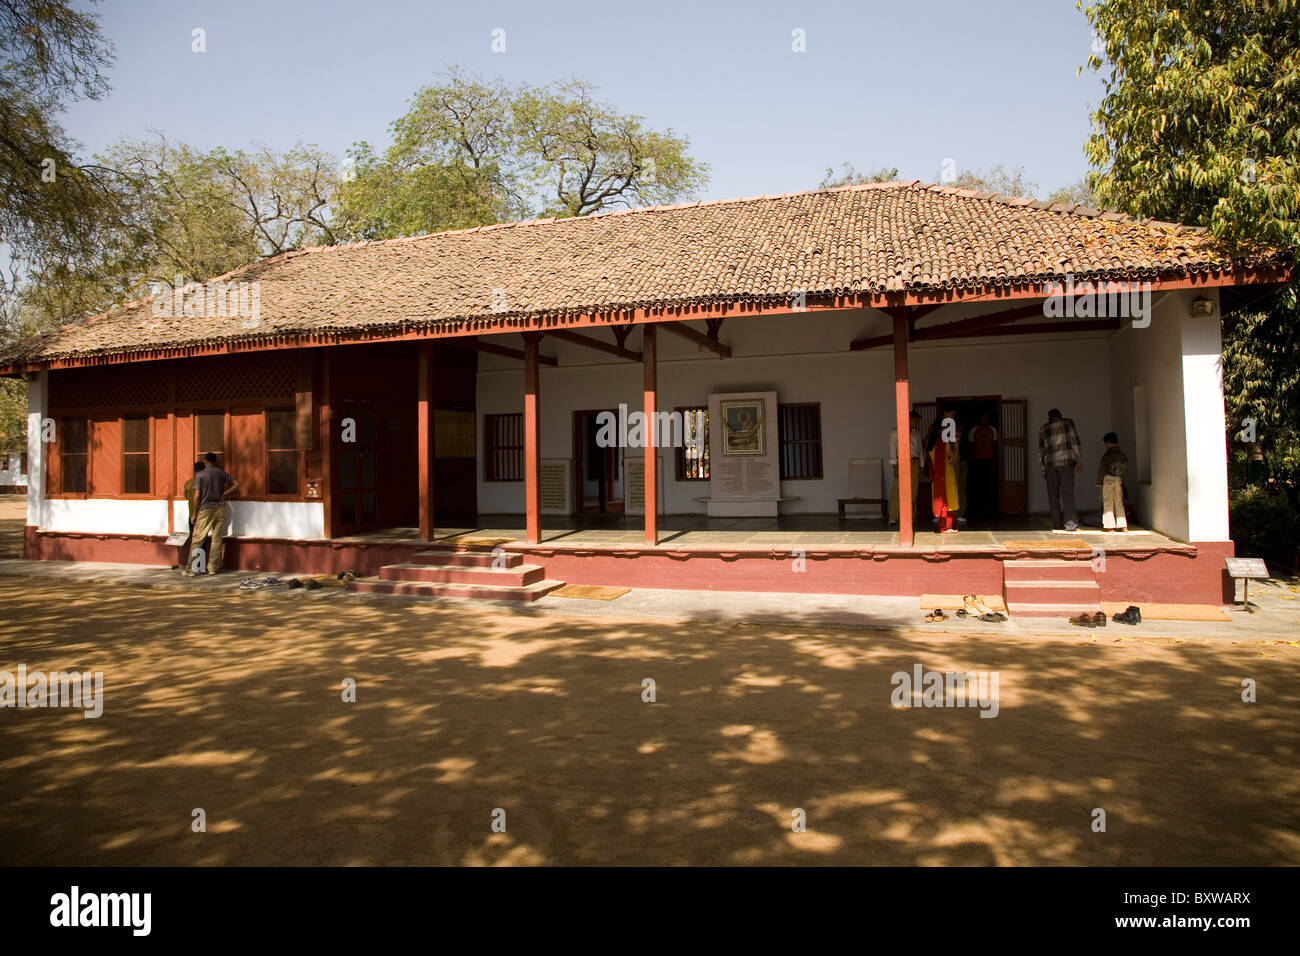 One of the buildings within the Sabarmati Ashram (also known as the Gandhi or Satyagraha or Harijan Ashram) in Ahmedabad, India. Stock Photo